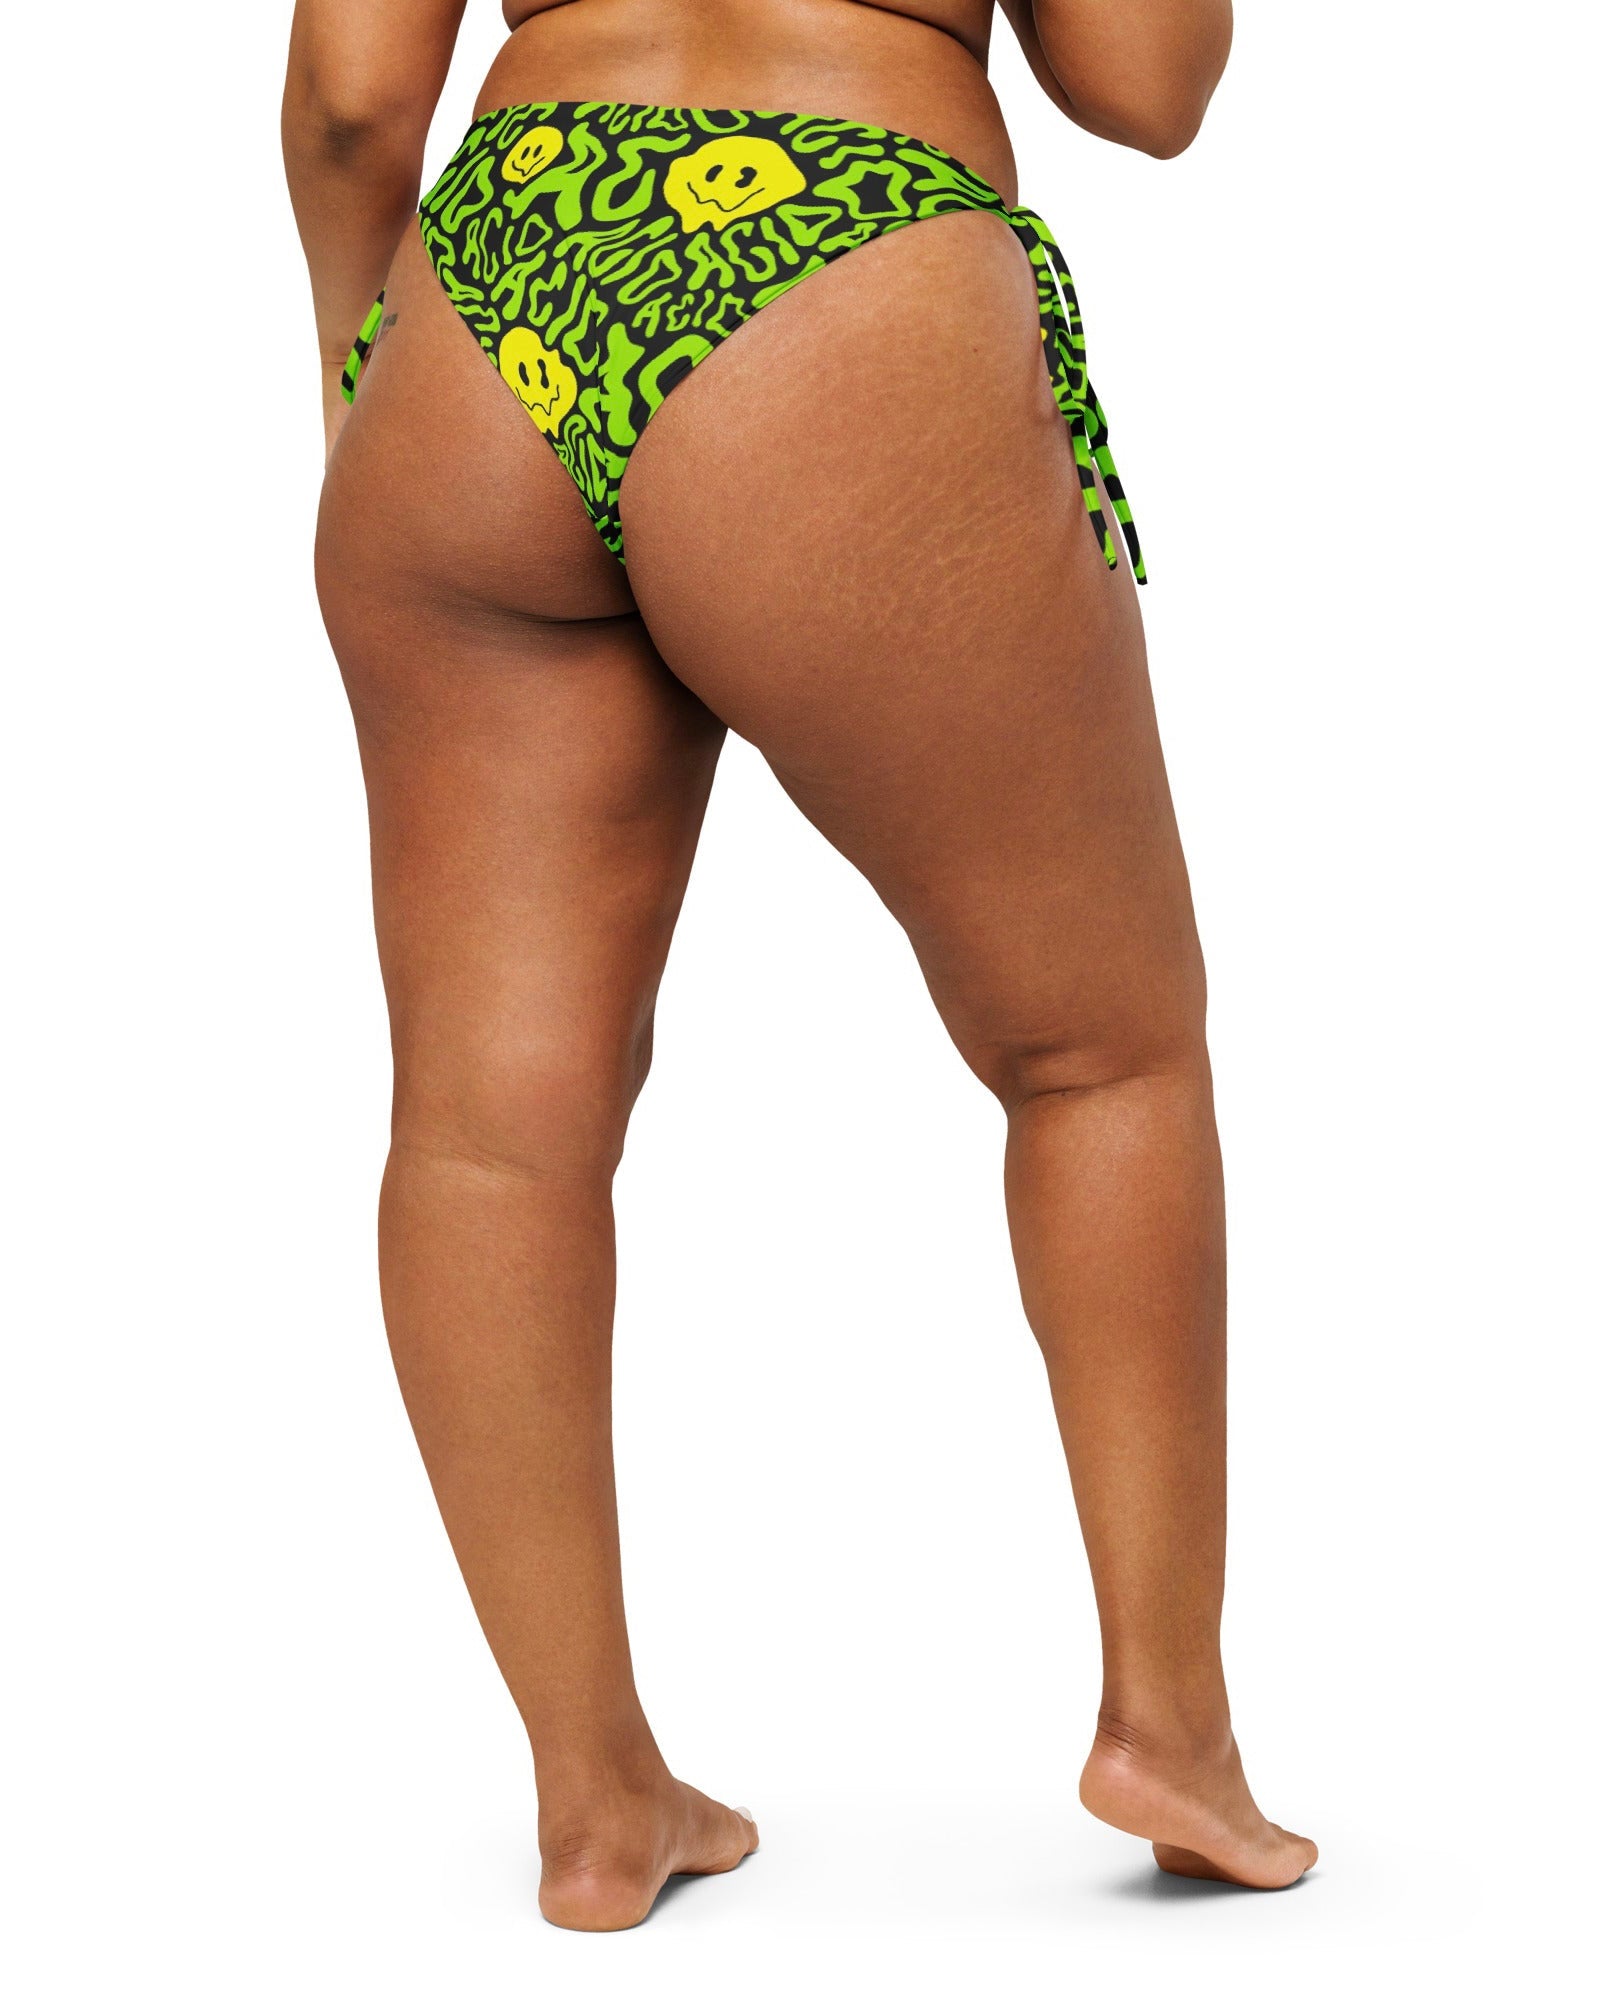 Model showing off the back of the Acid Smilez String Bottoms by One Stop Rave.